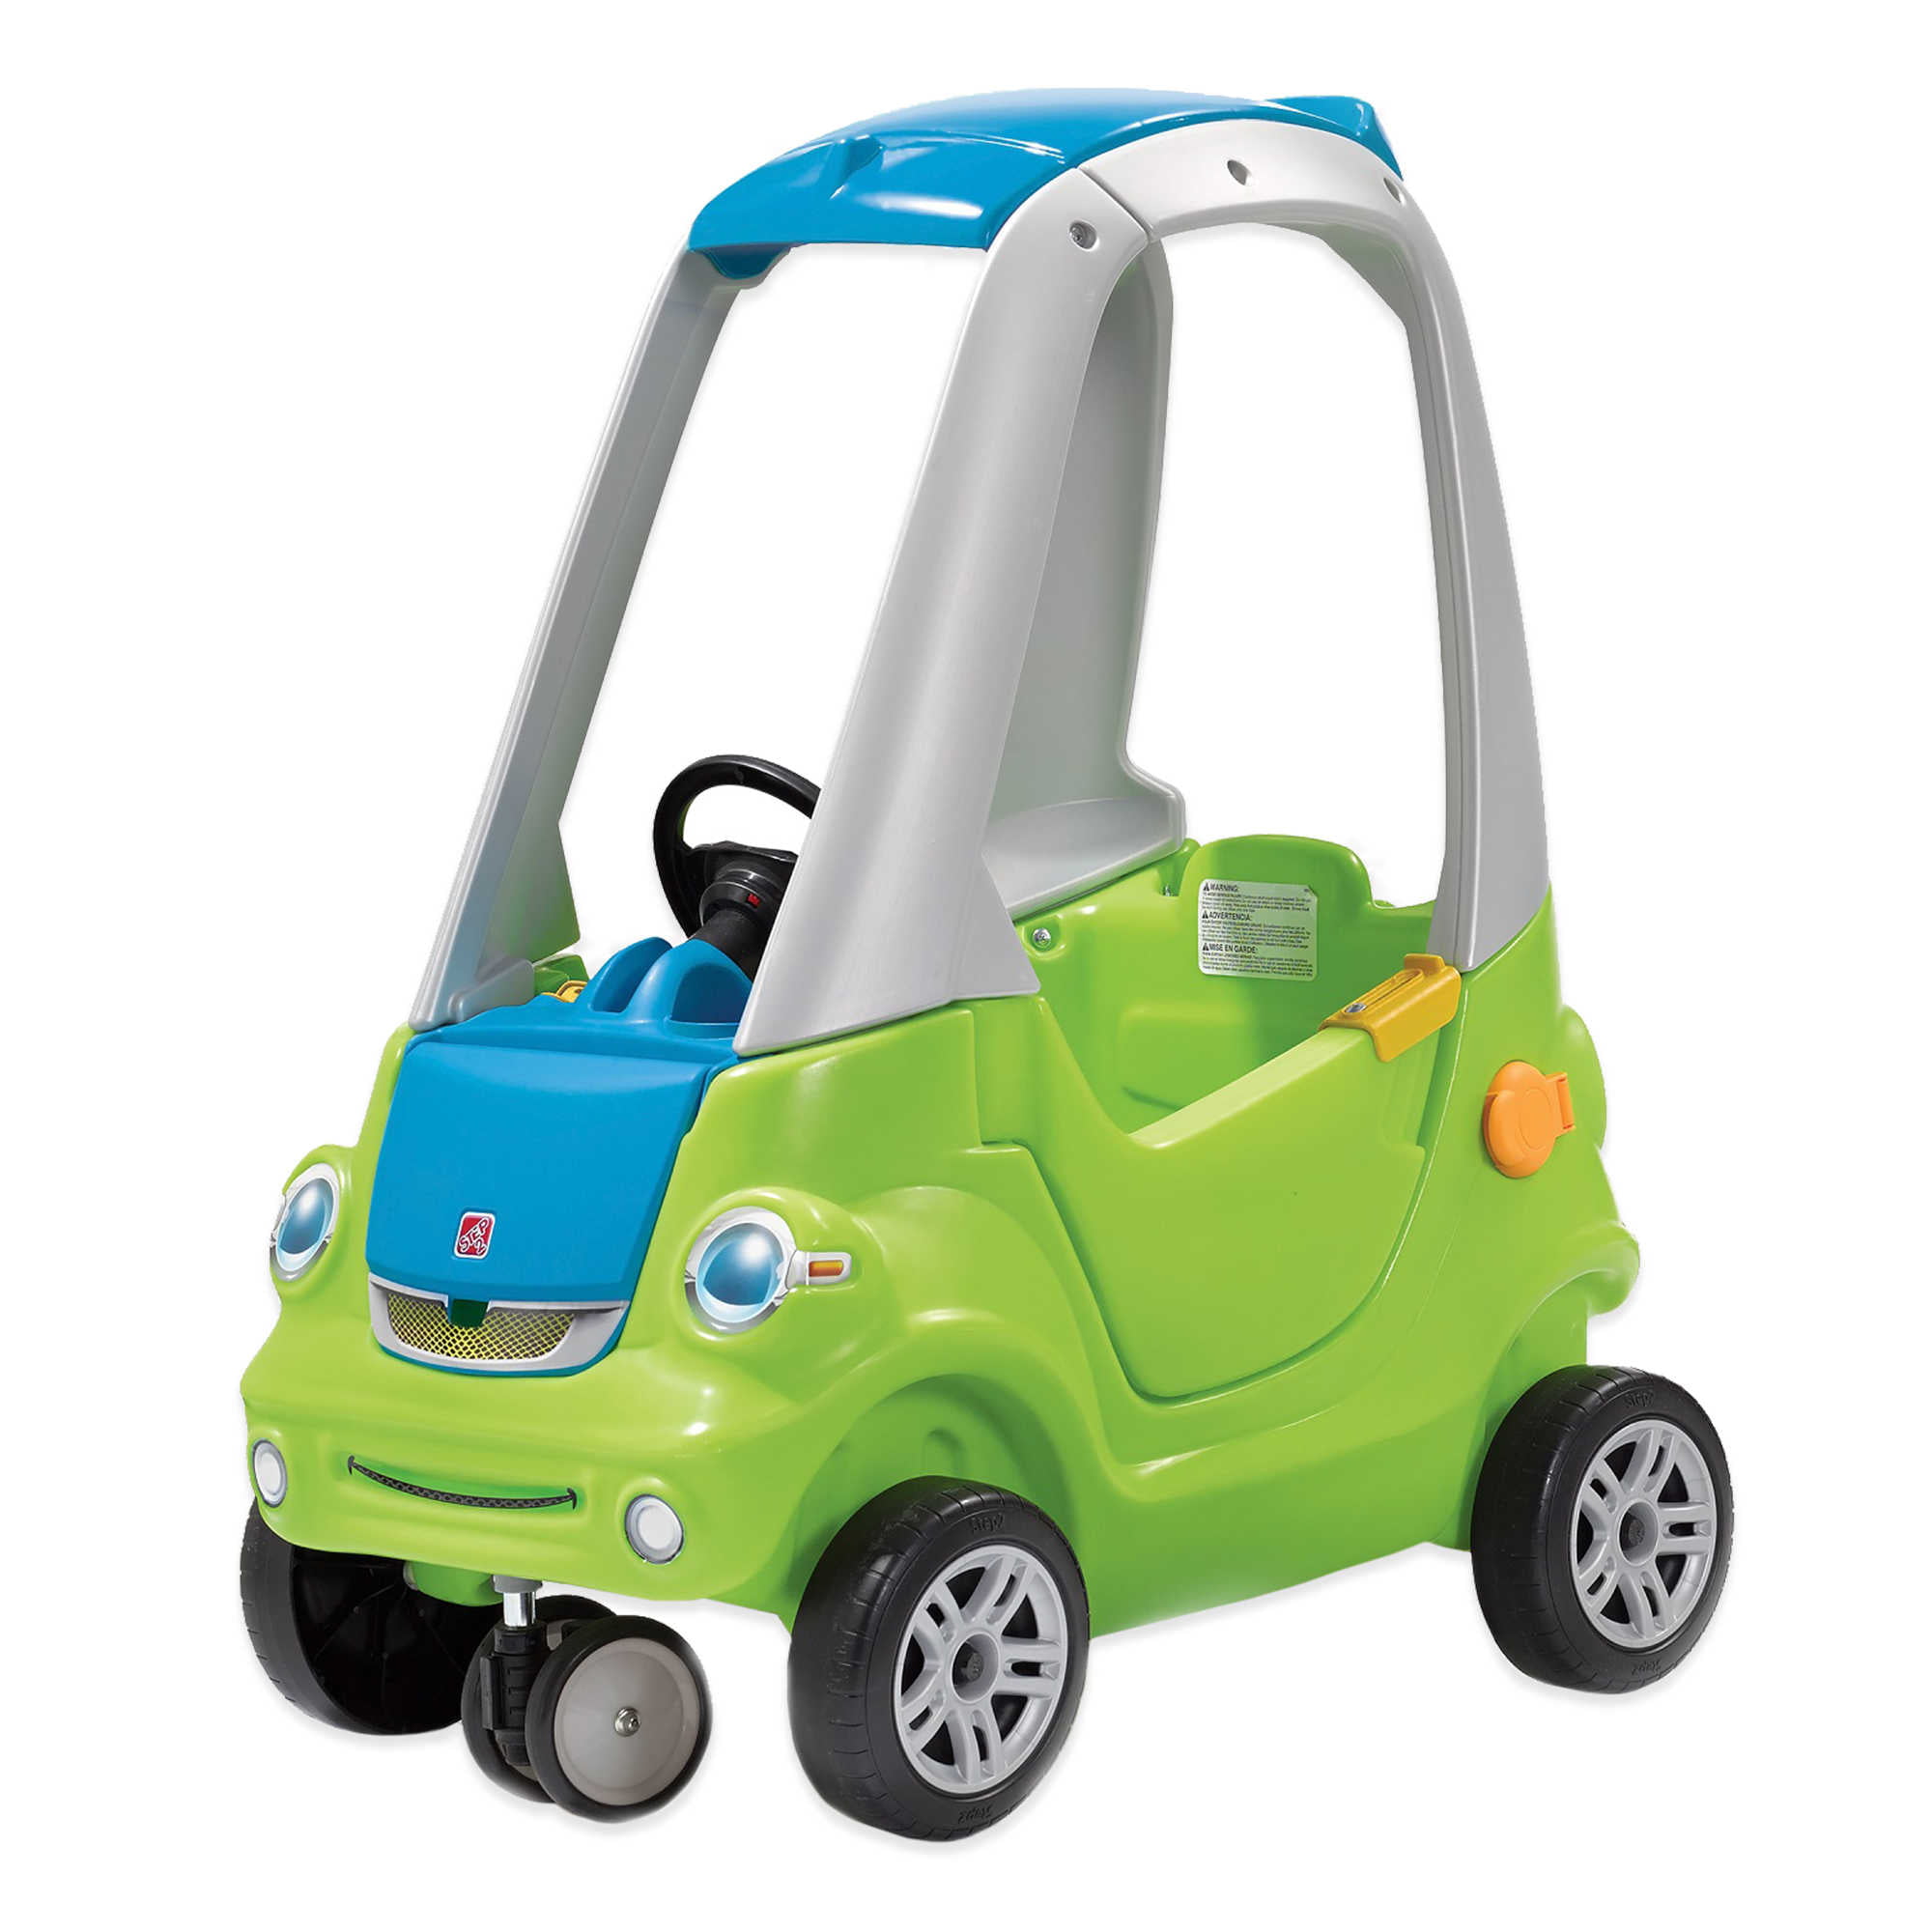 Ride on cars for toddlers